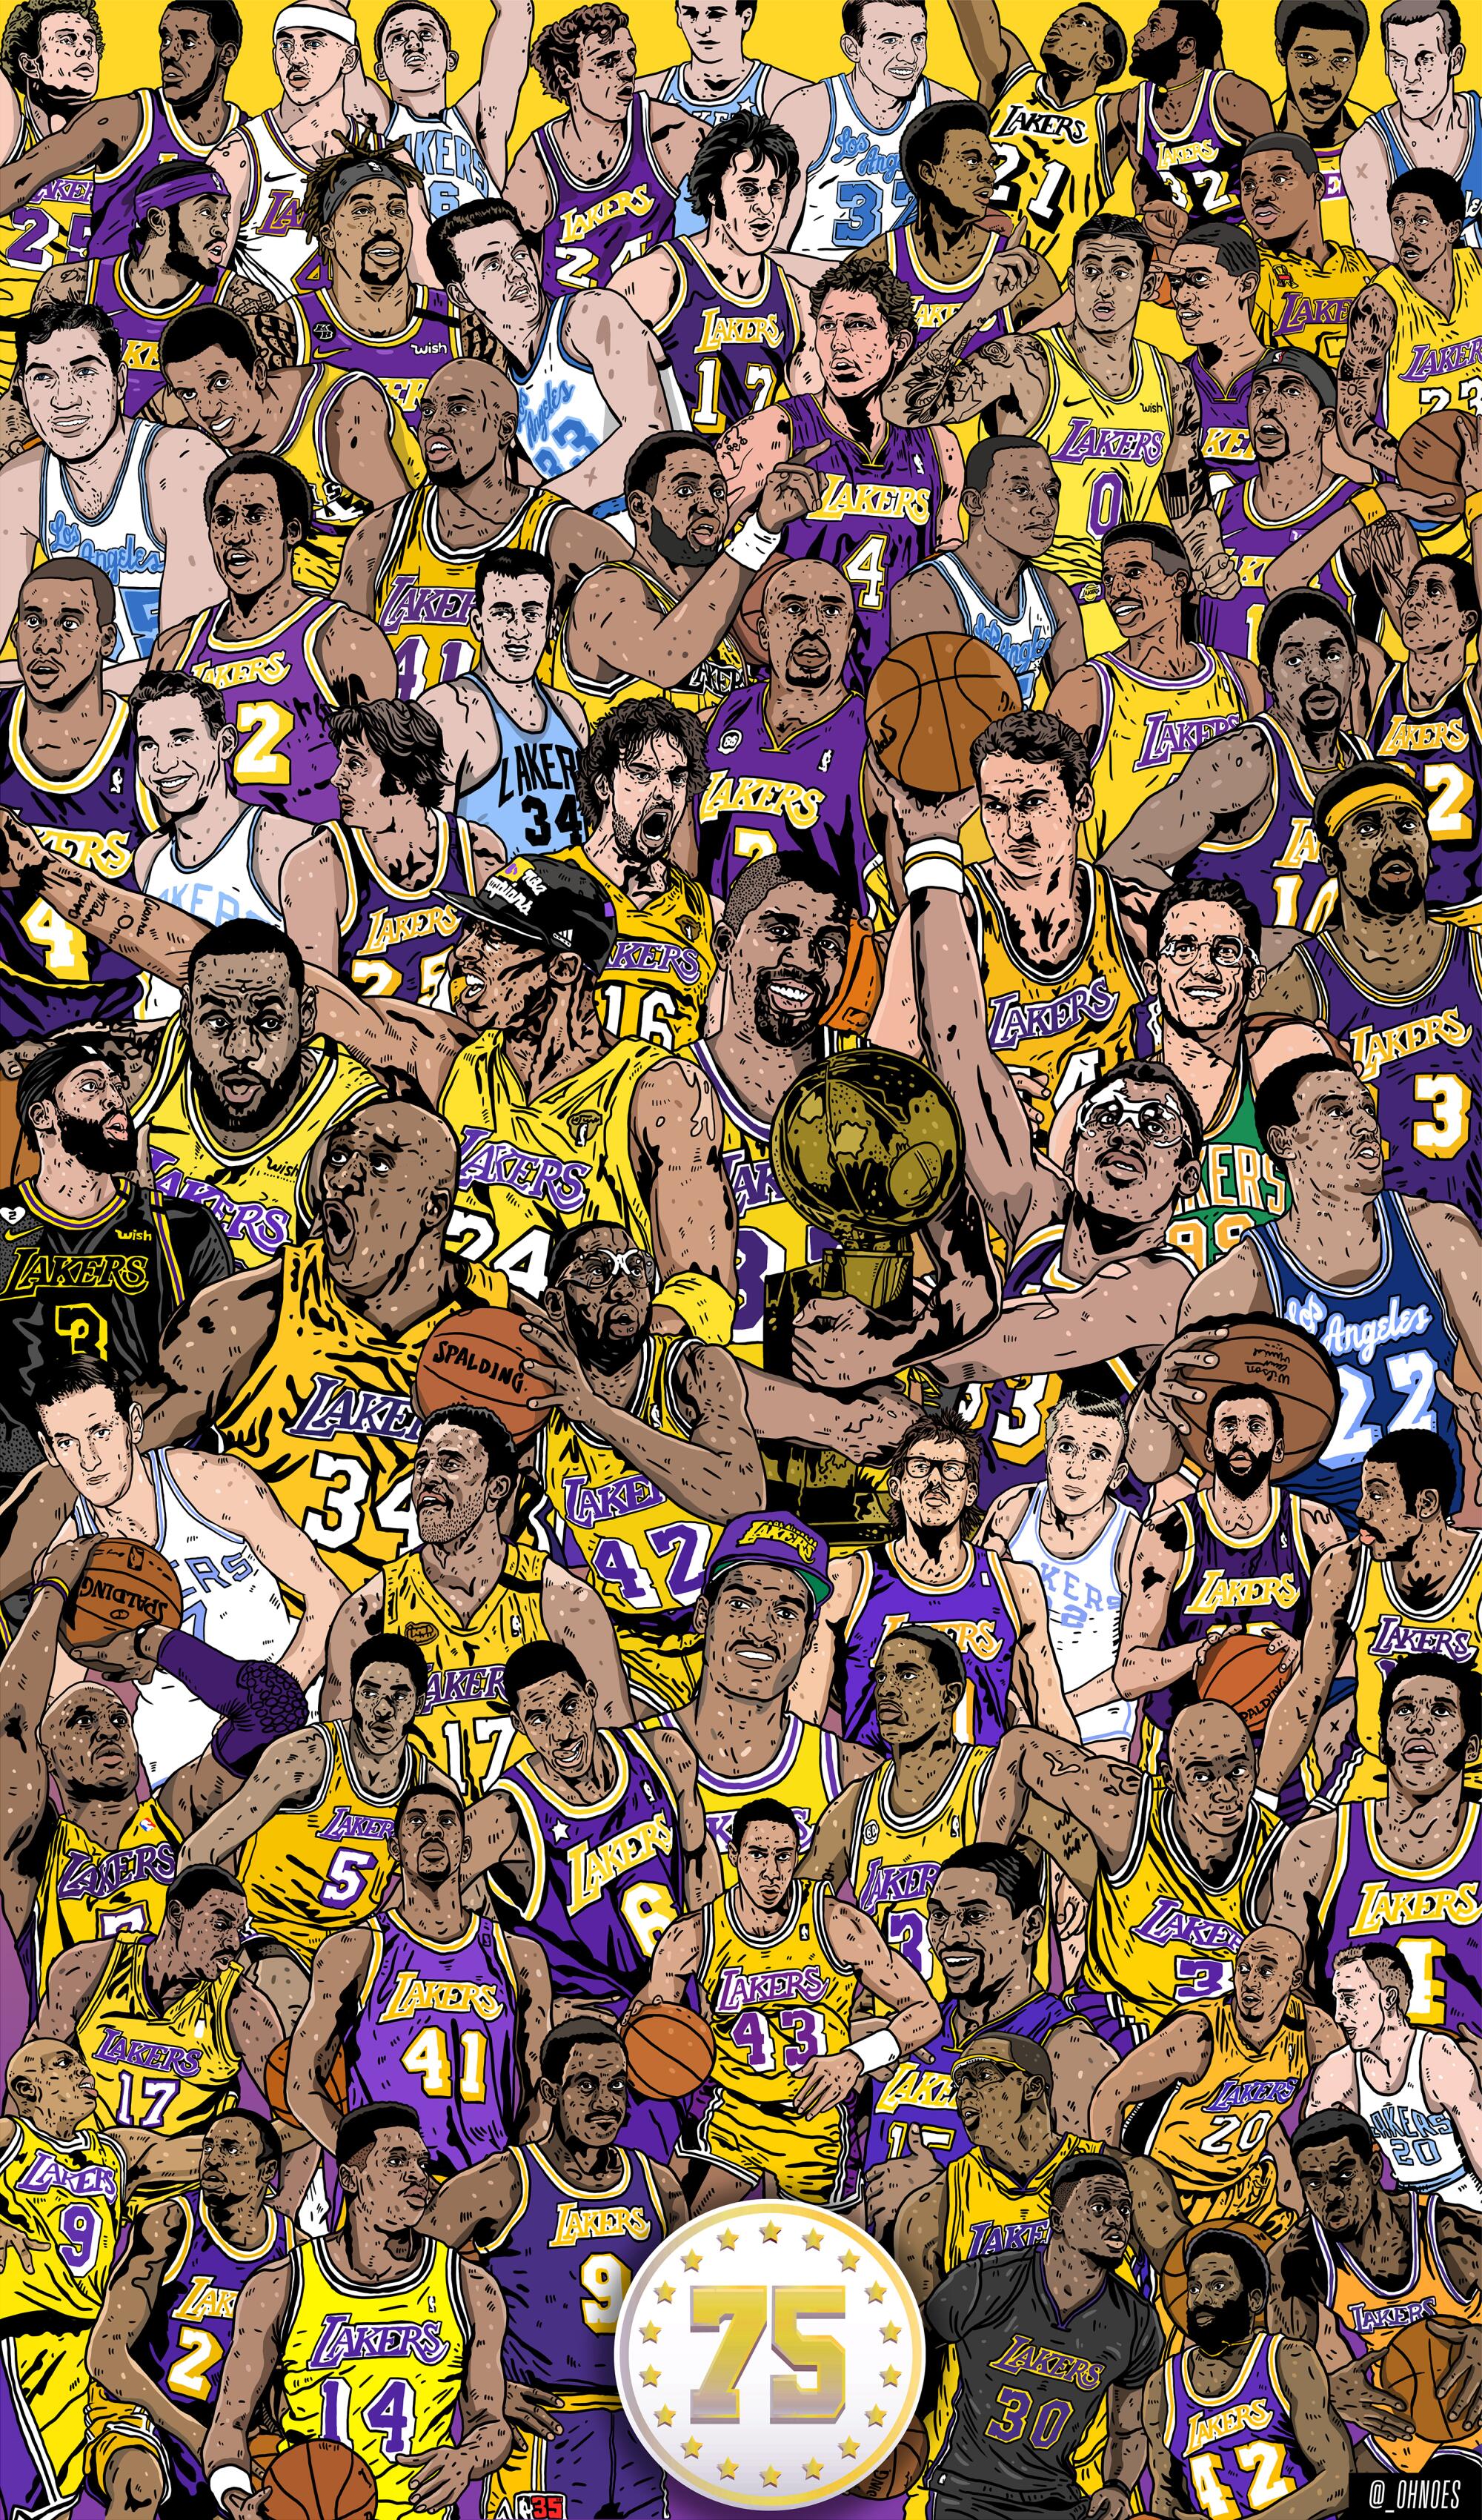 Got a new member in the Wallpaper - Los Angeles Lakers